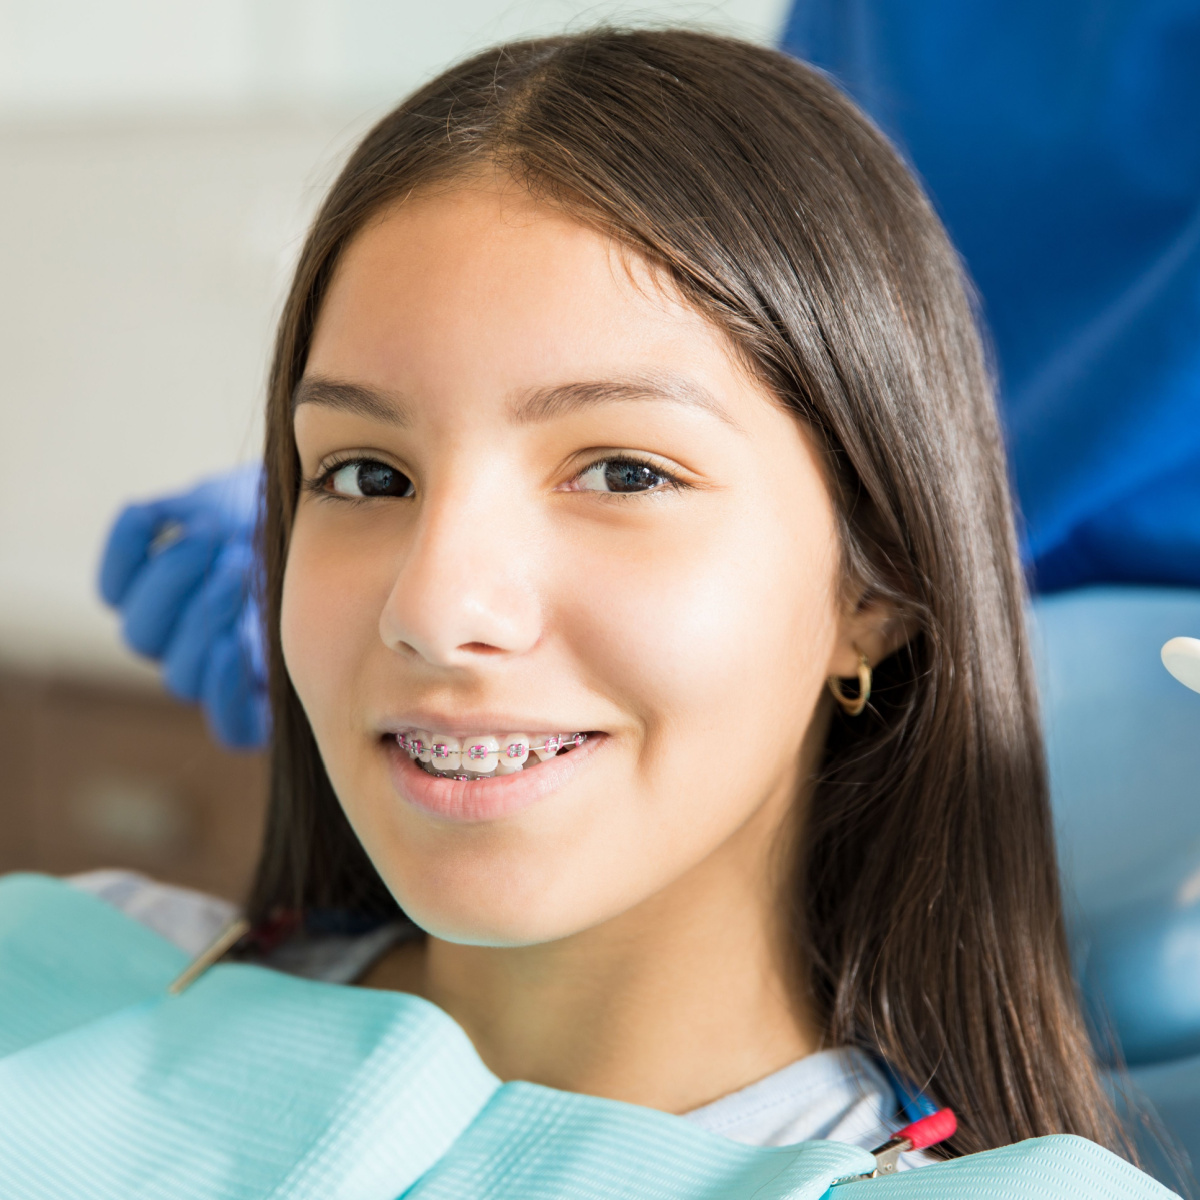 Here are some tips to make your first week with your South Houston braces comfortable.